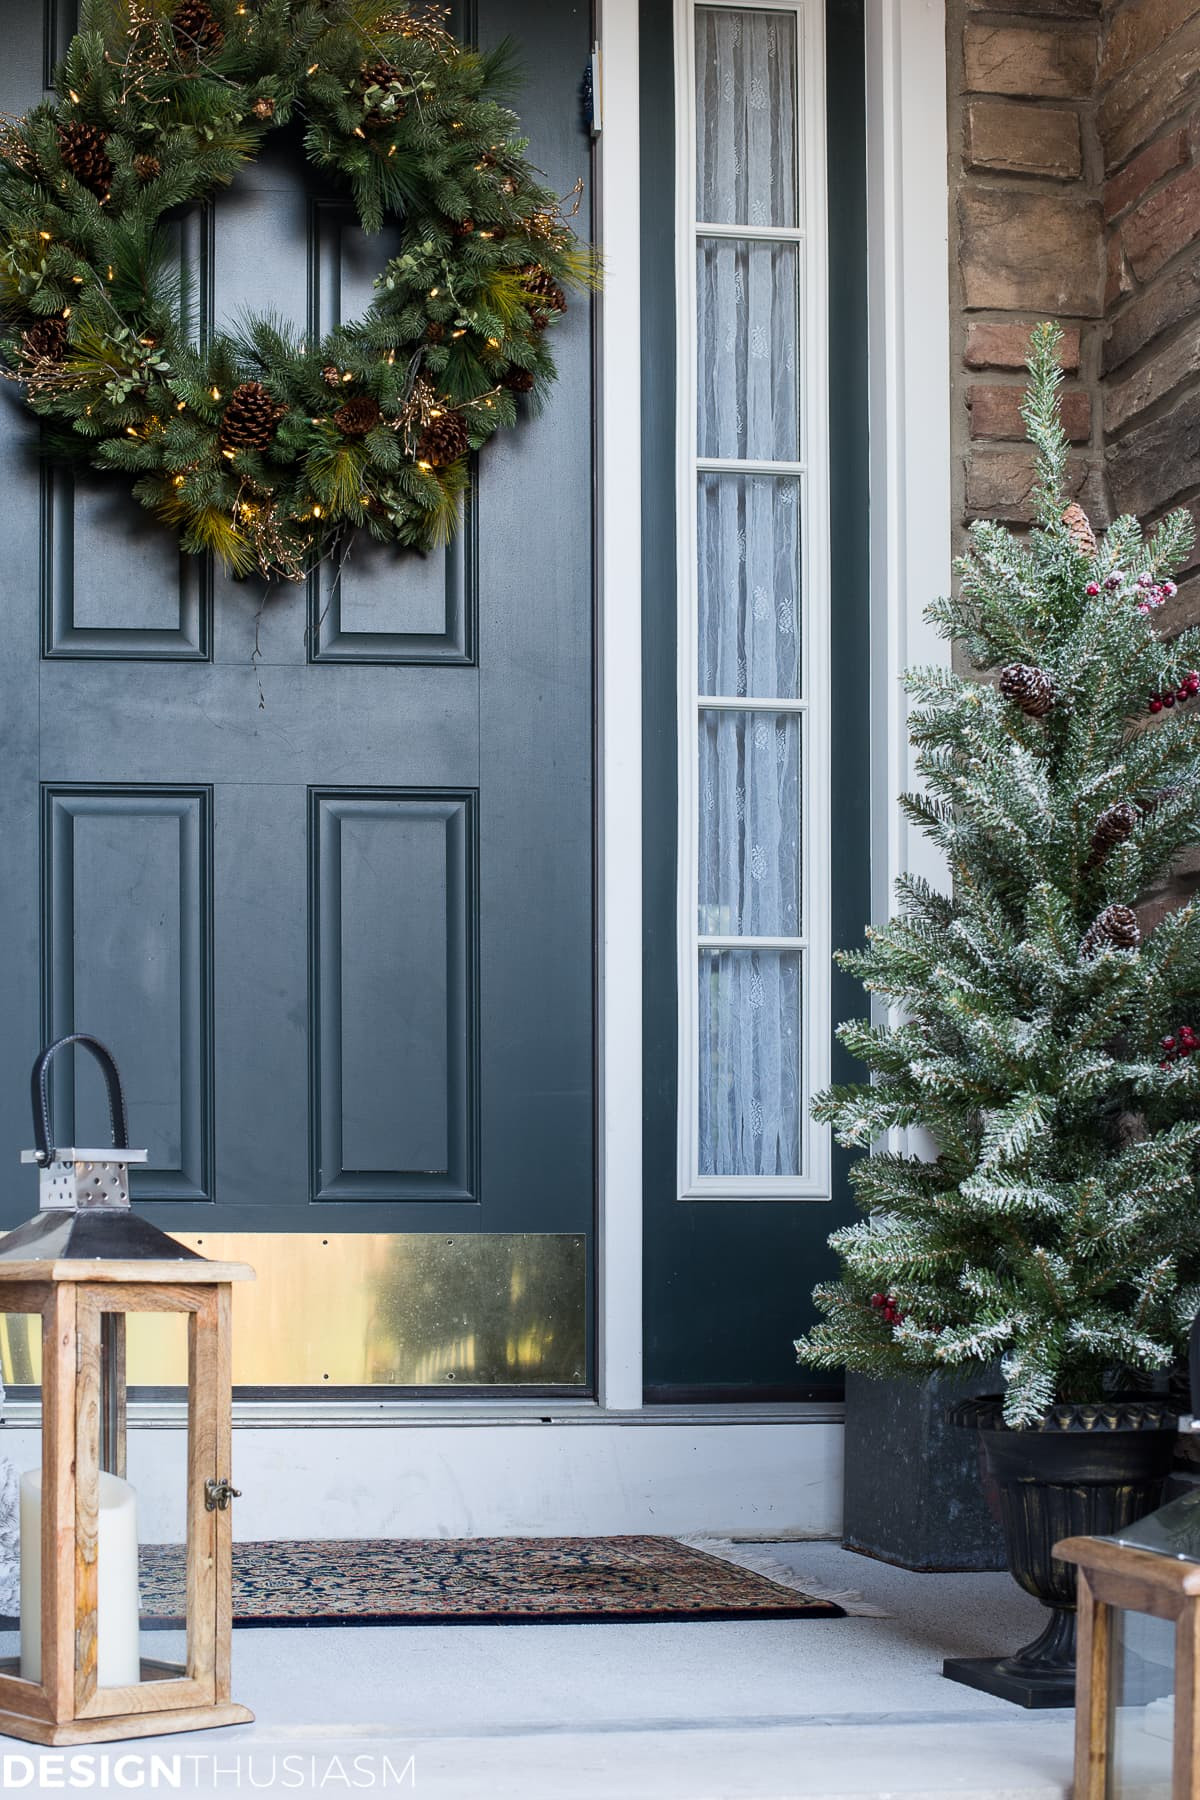 Porch Christmas Decorating
 Easy Outdoor Christmas Decorating Ideas for a Tiny Front Porch